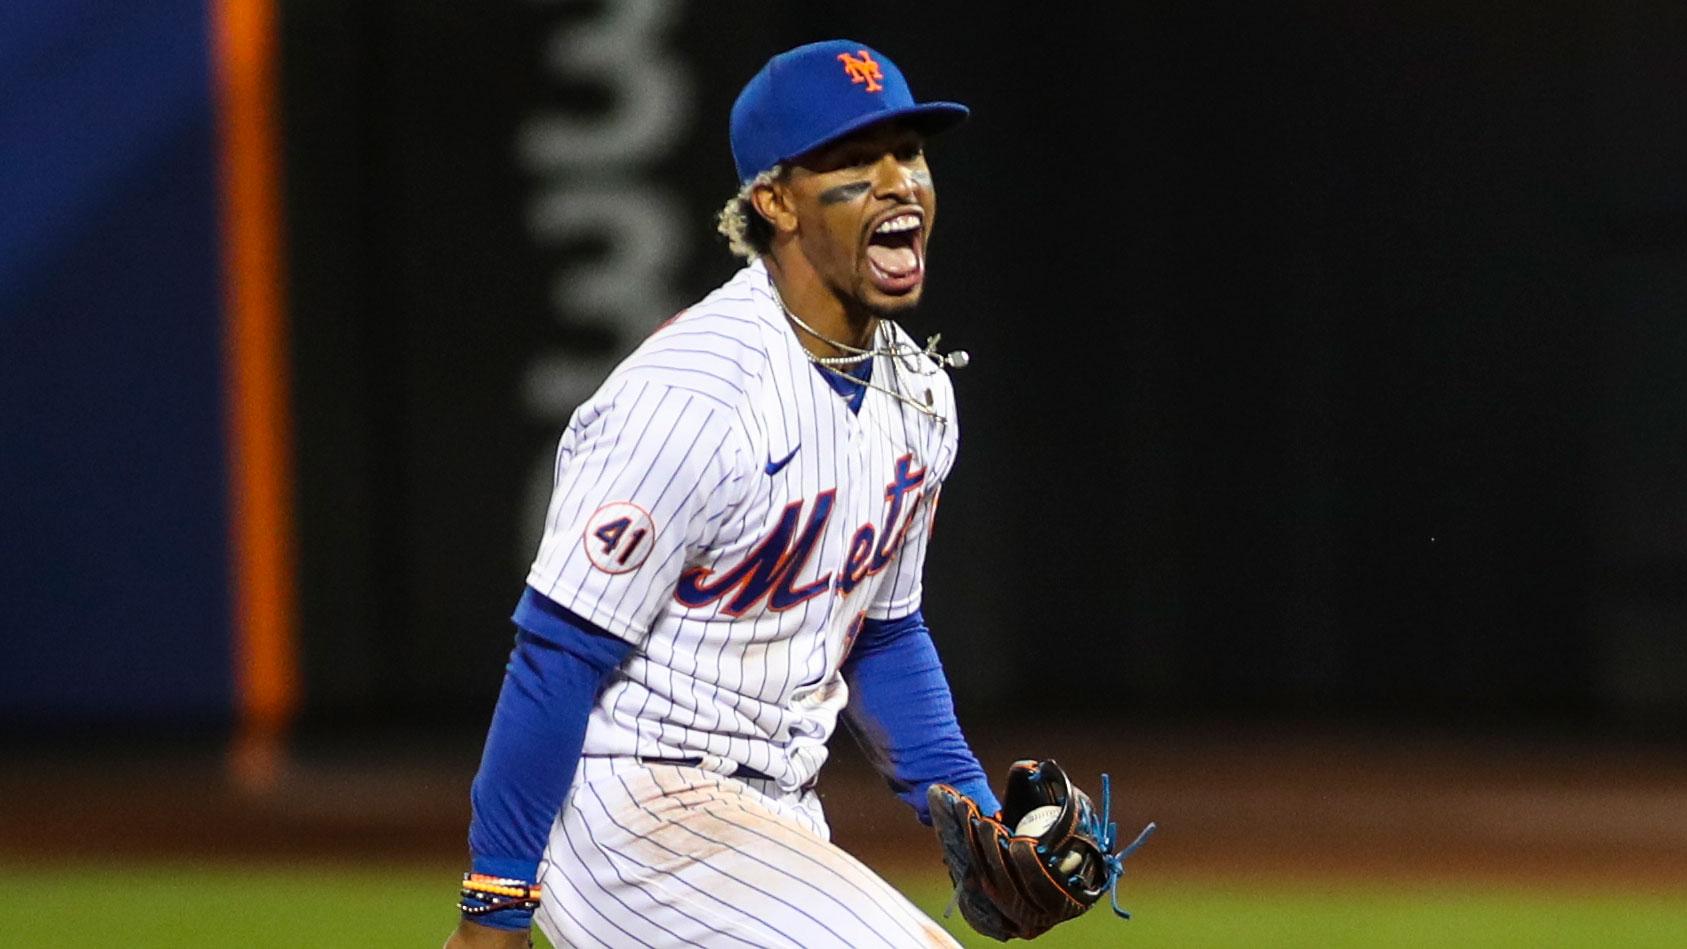 Apr 27, 2021; New York City, New York, USA; New York Mets shortstop Francisco Lindor (12) reacts after tagging out Boston Red Sox right fielder Hunter Renfroe (not pictured) for an unassisted double play during the seventh inning at Citi Field. / Wendell Cruz-USA TODAY Sports